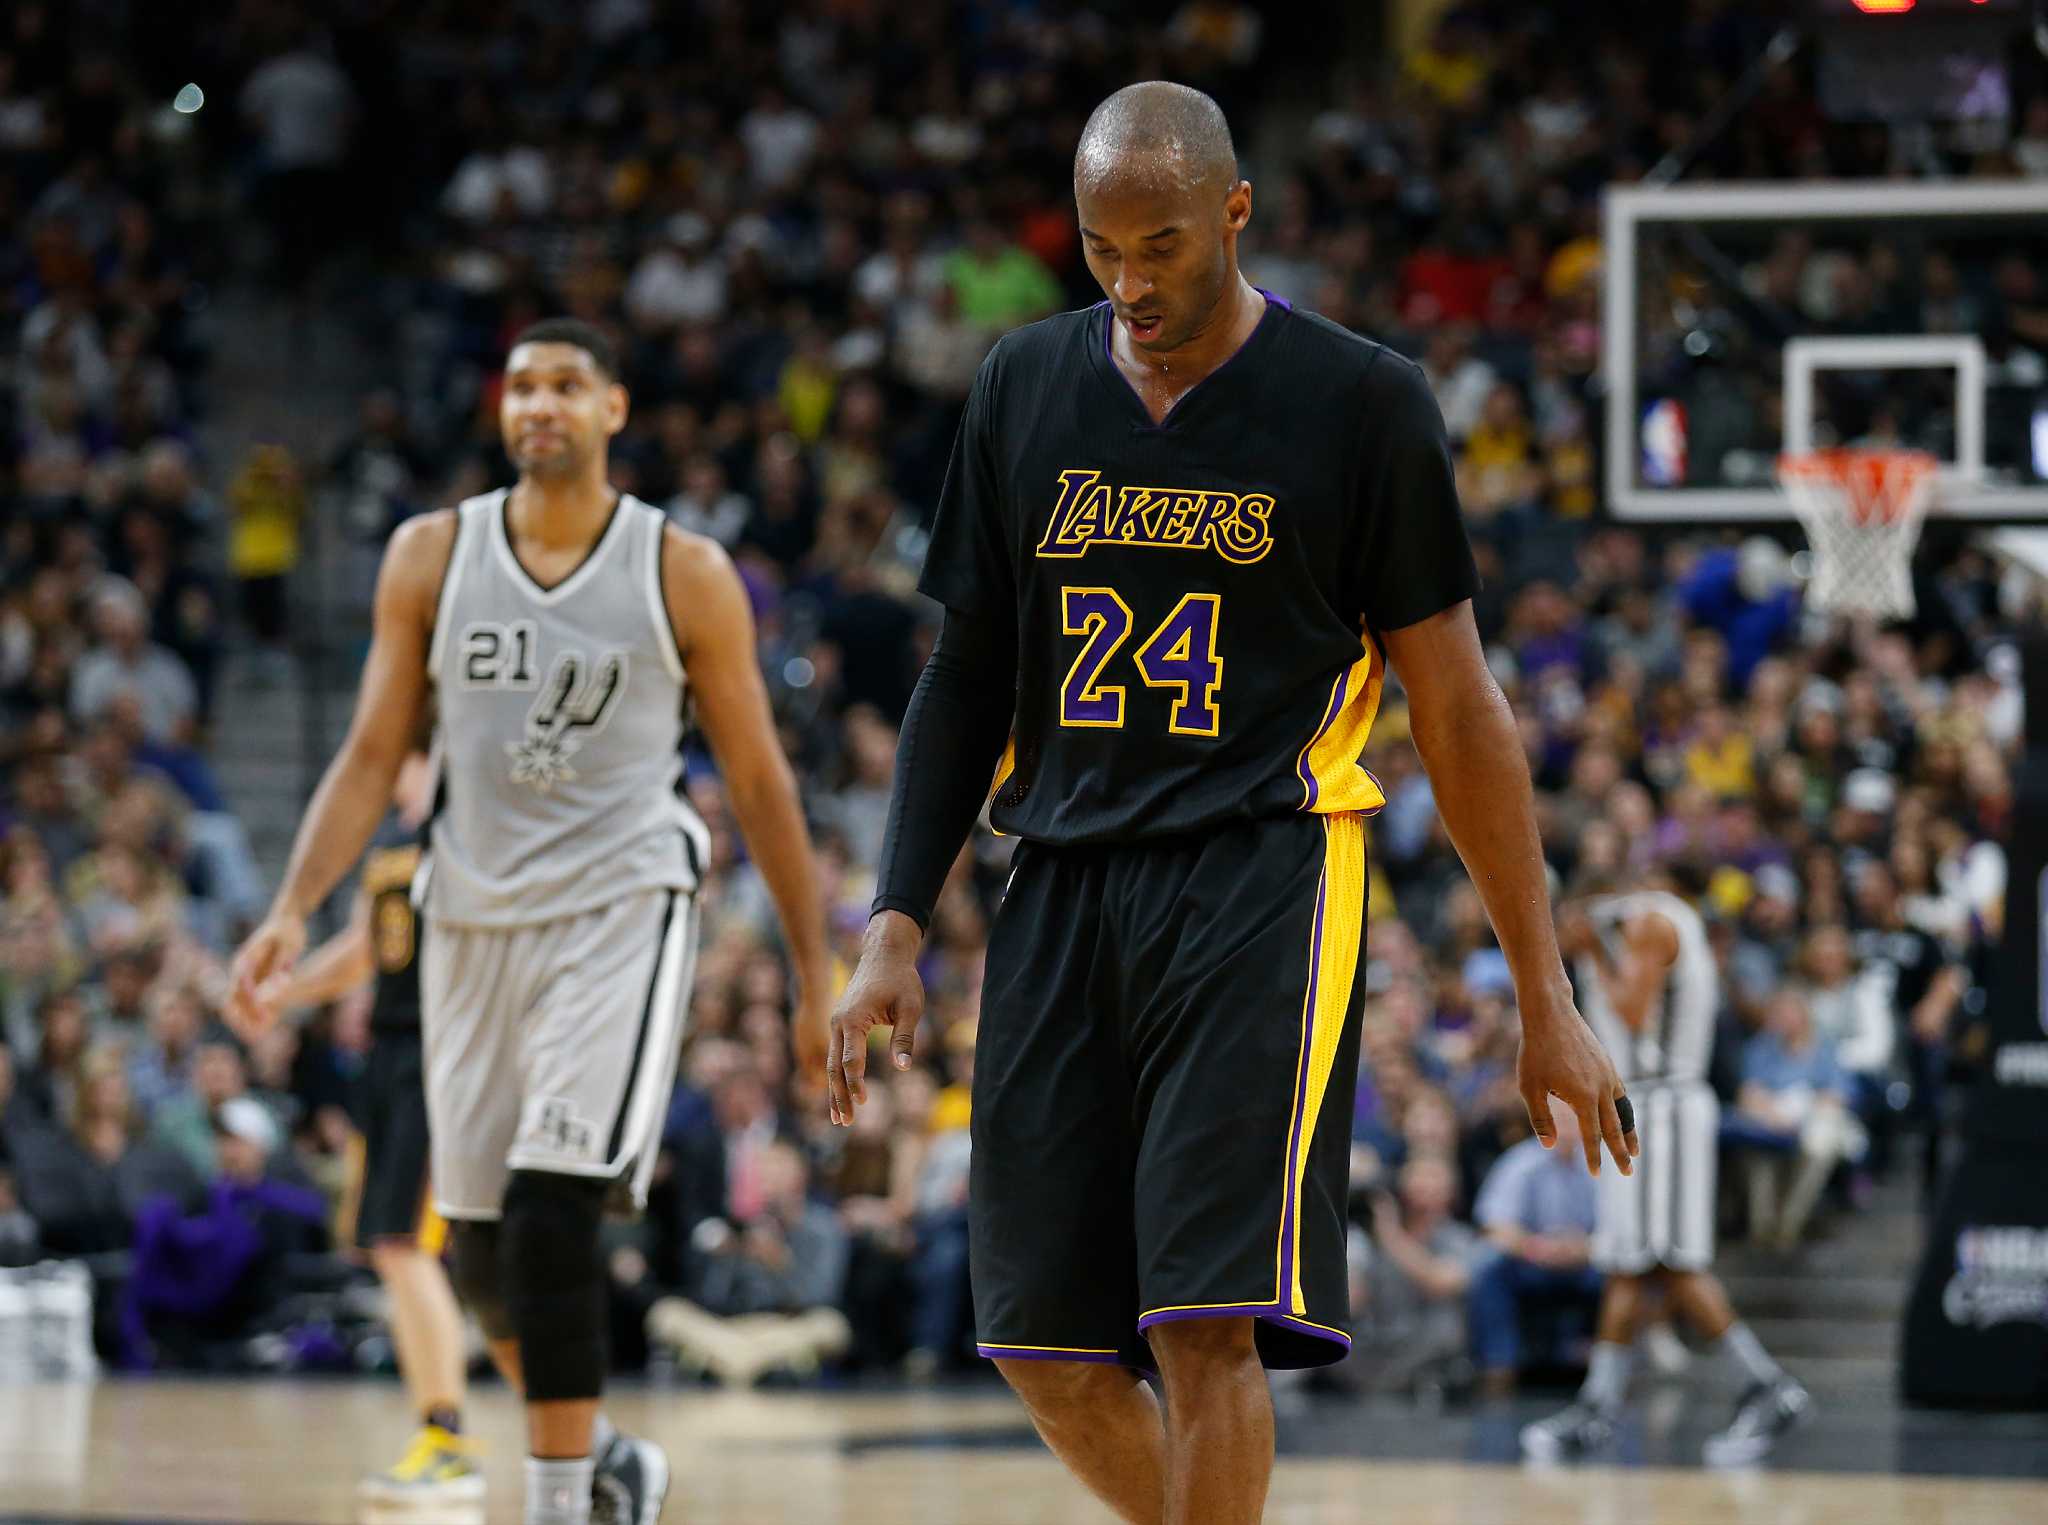 As Bryant rides off, Duncan prepares for another postseason